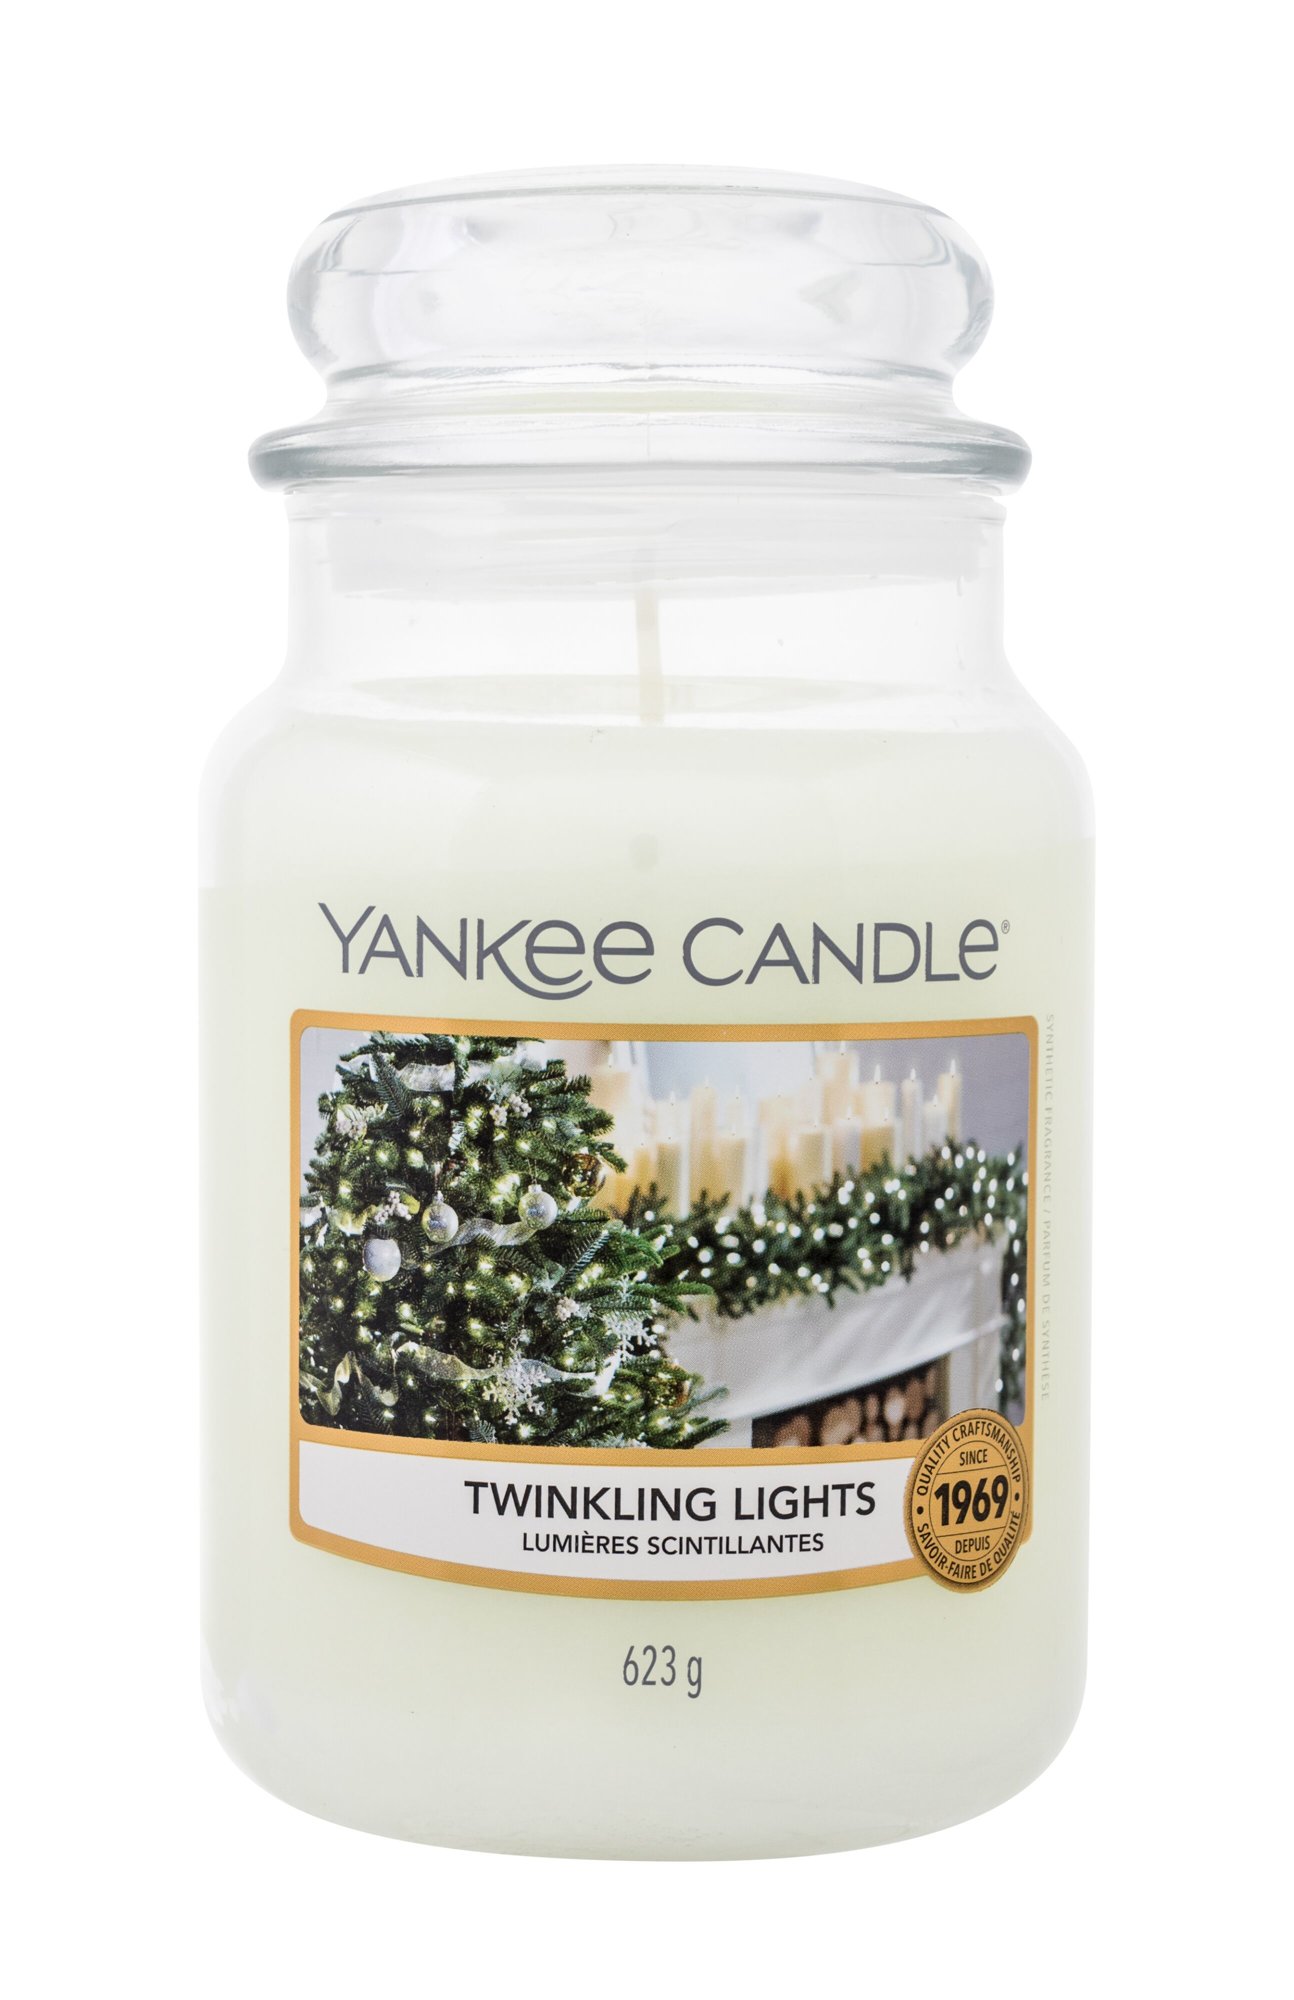 Yankee Candle Twinkling Lights 623g Kvepalai Unisex Scented Candle